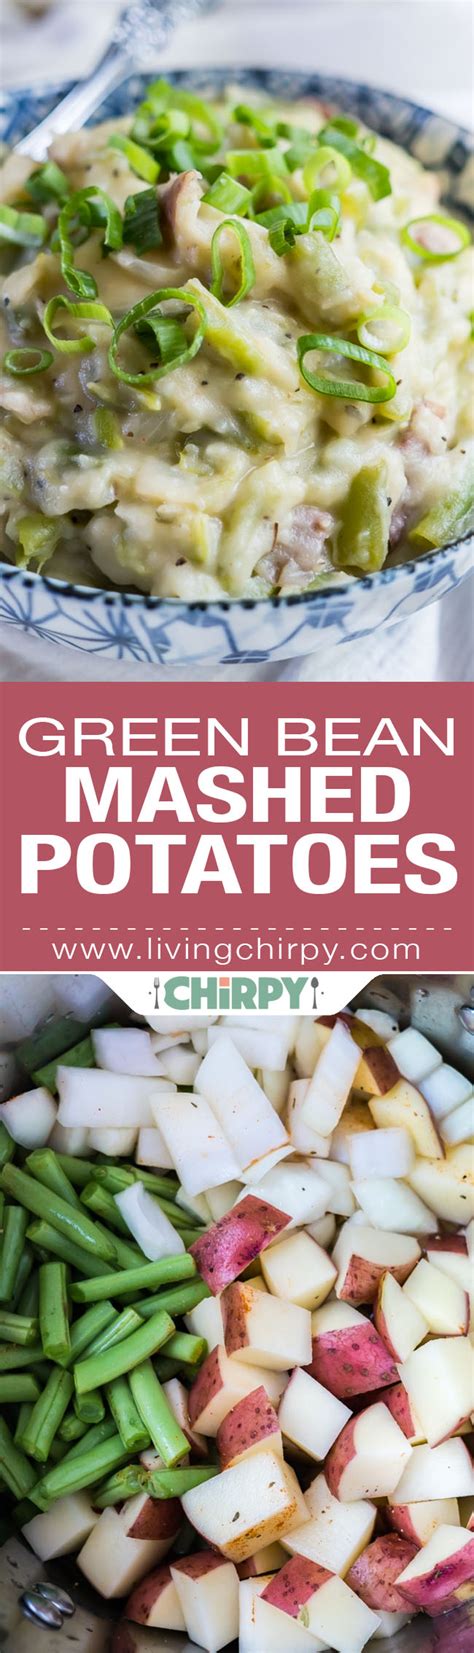 green-beans-and-smashed-potatoes-living image